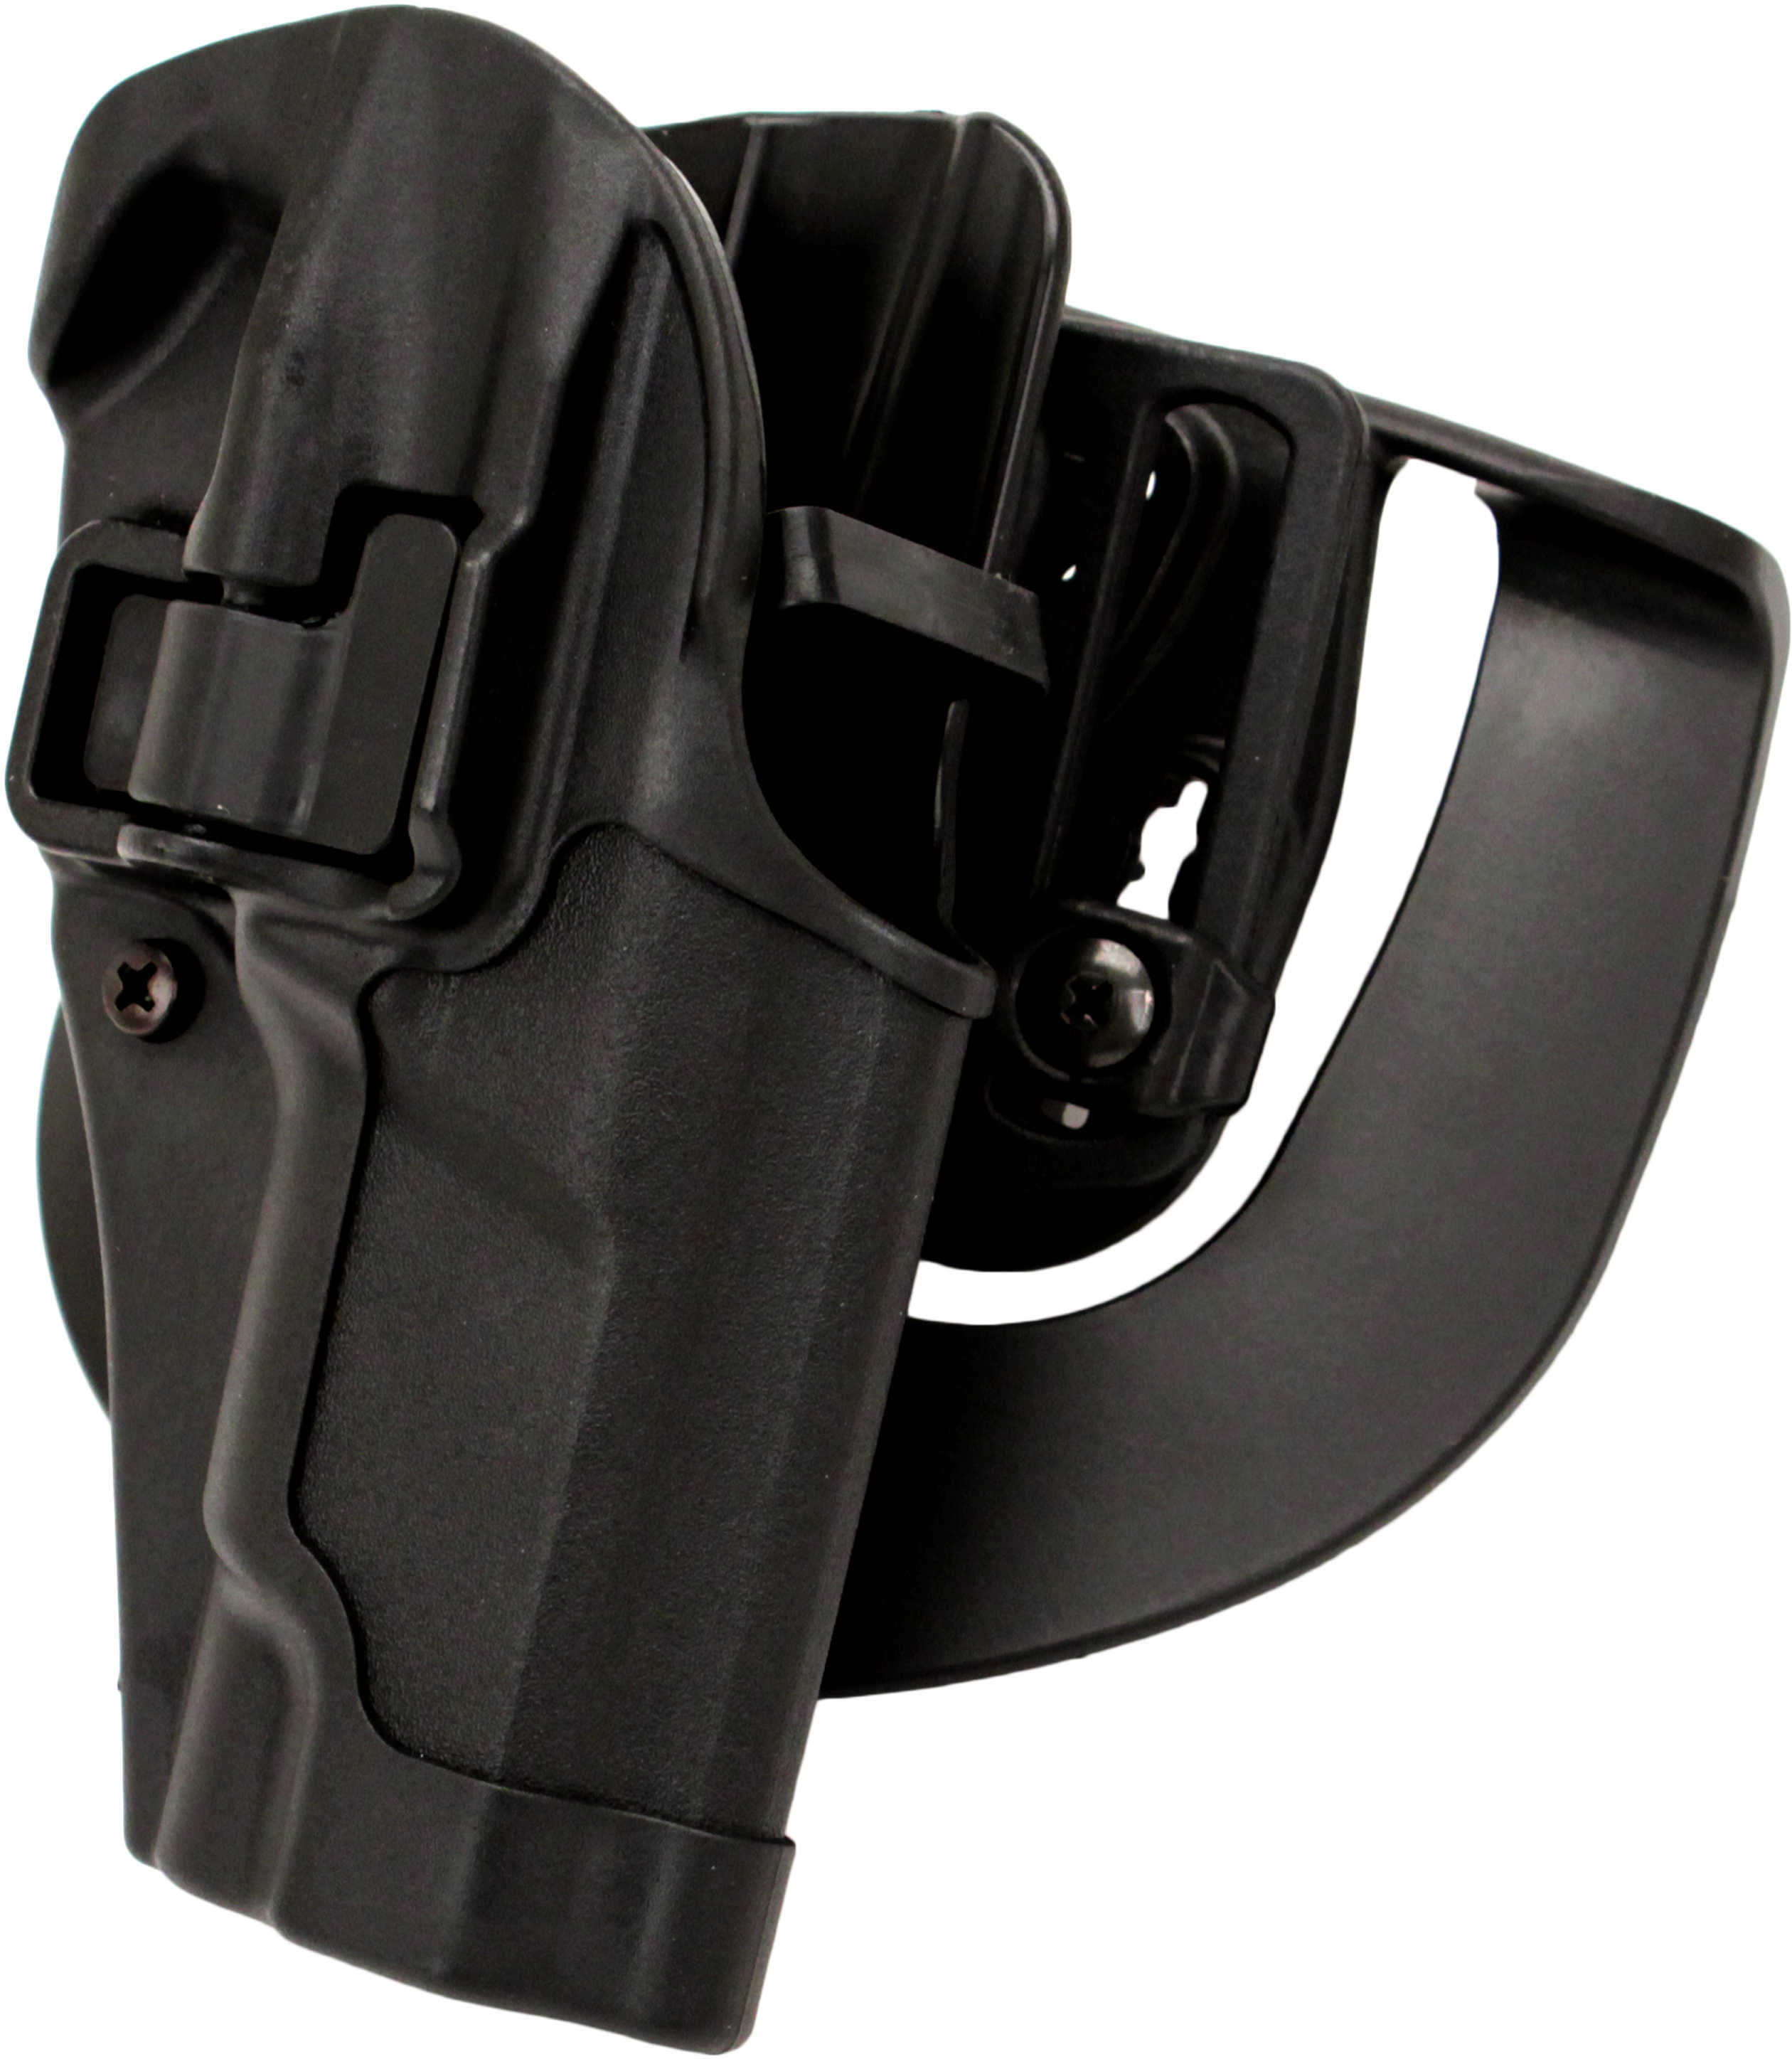 Blackhawk Products Serpa Holster Ruger® P85 89 RH